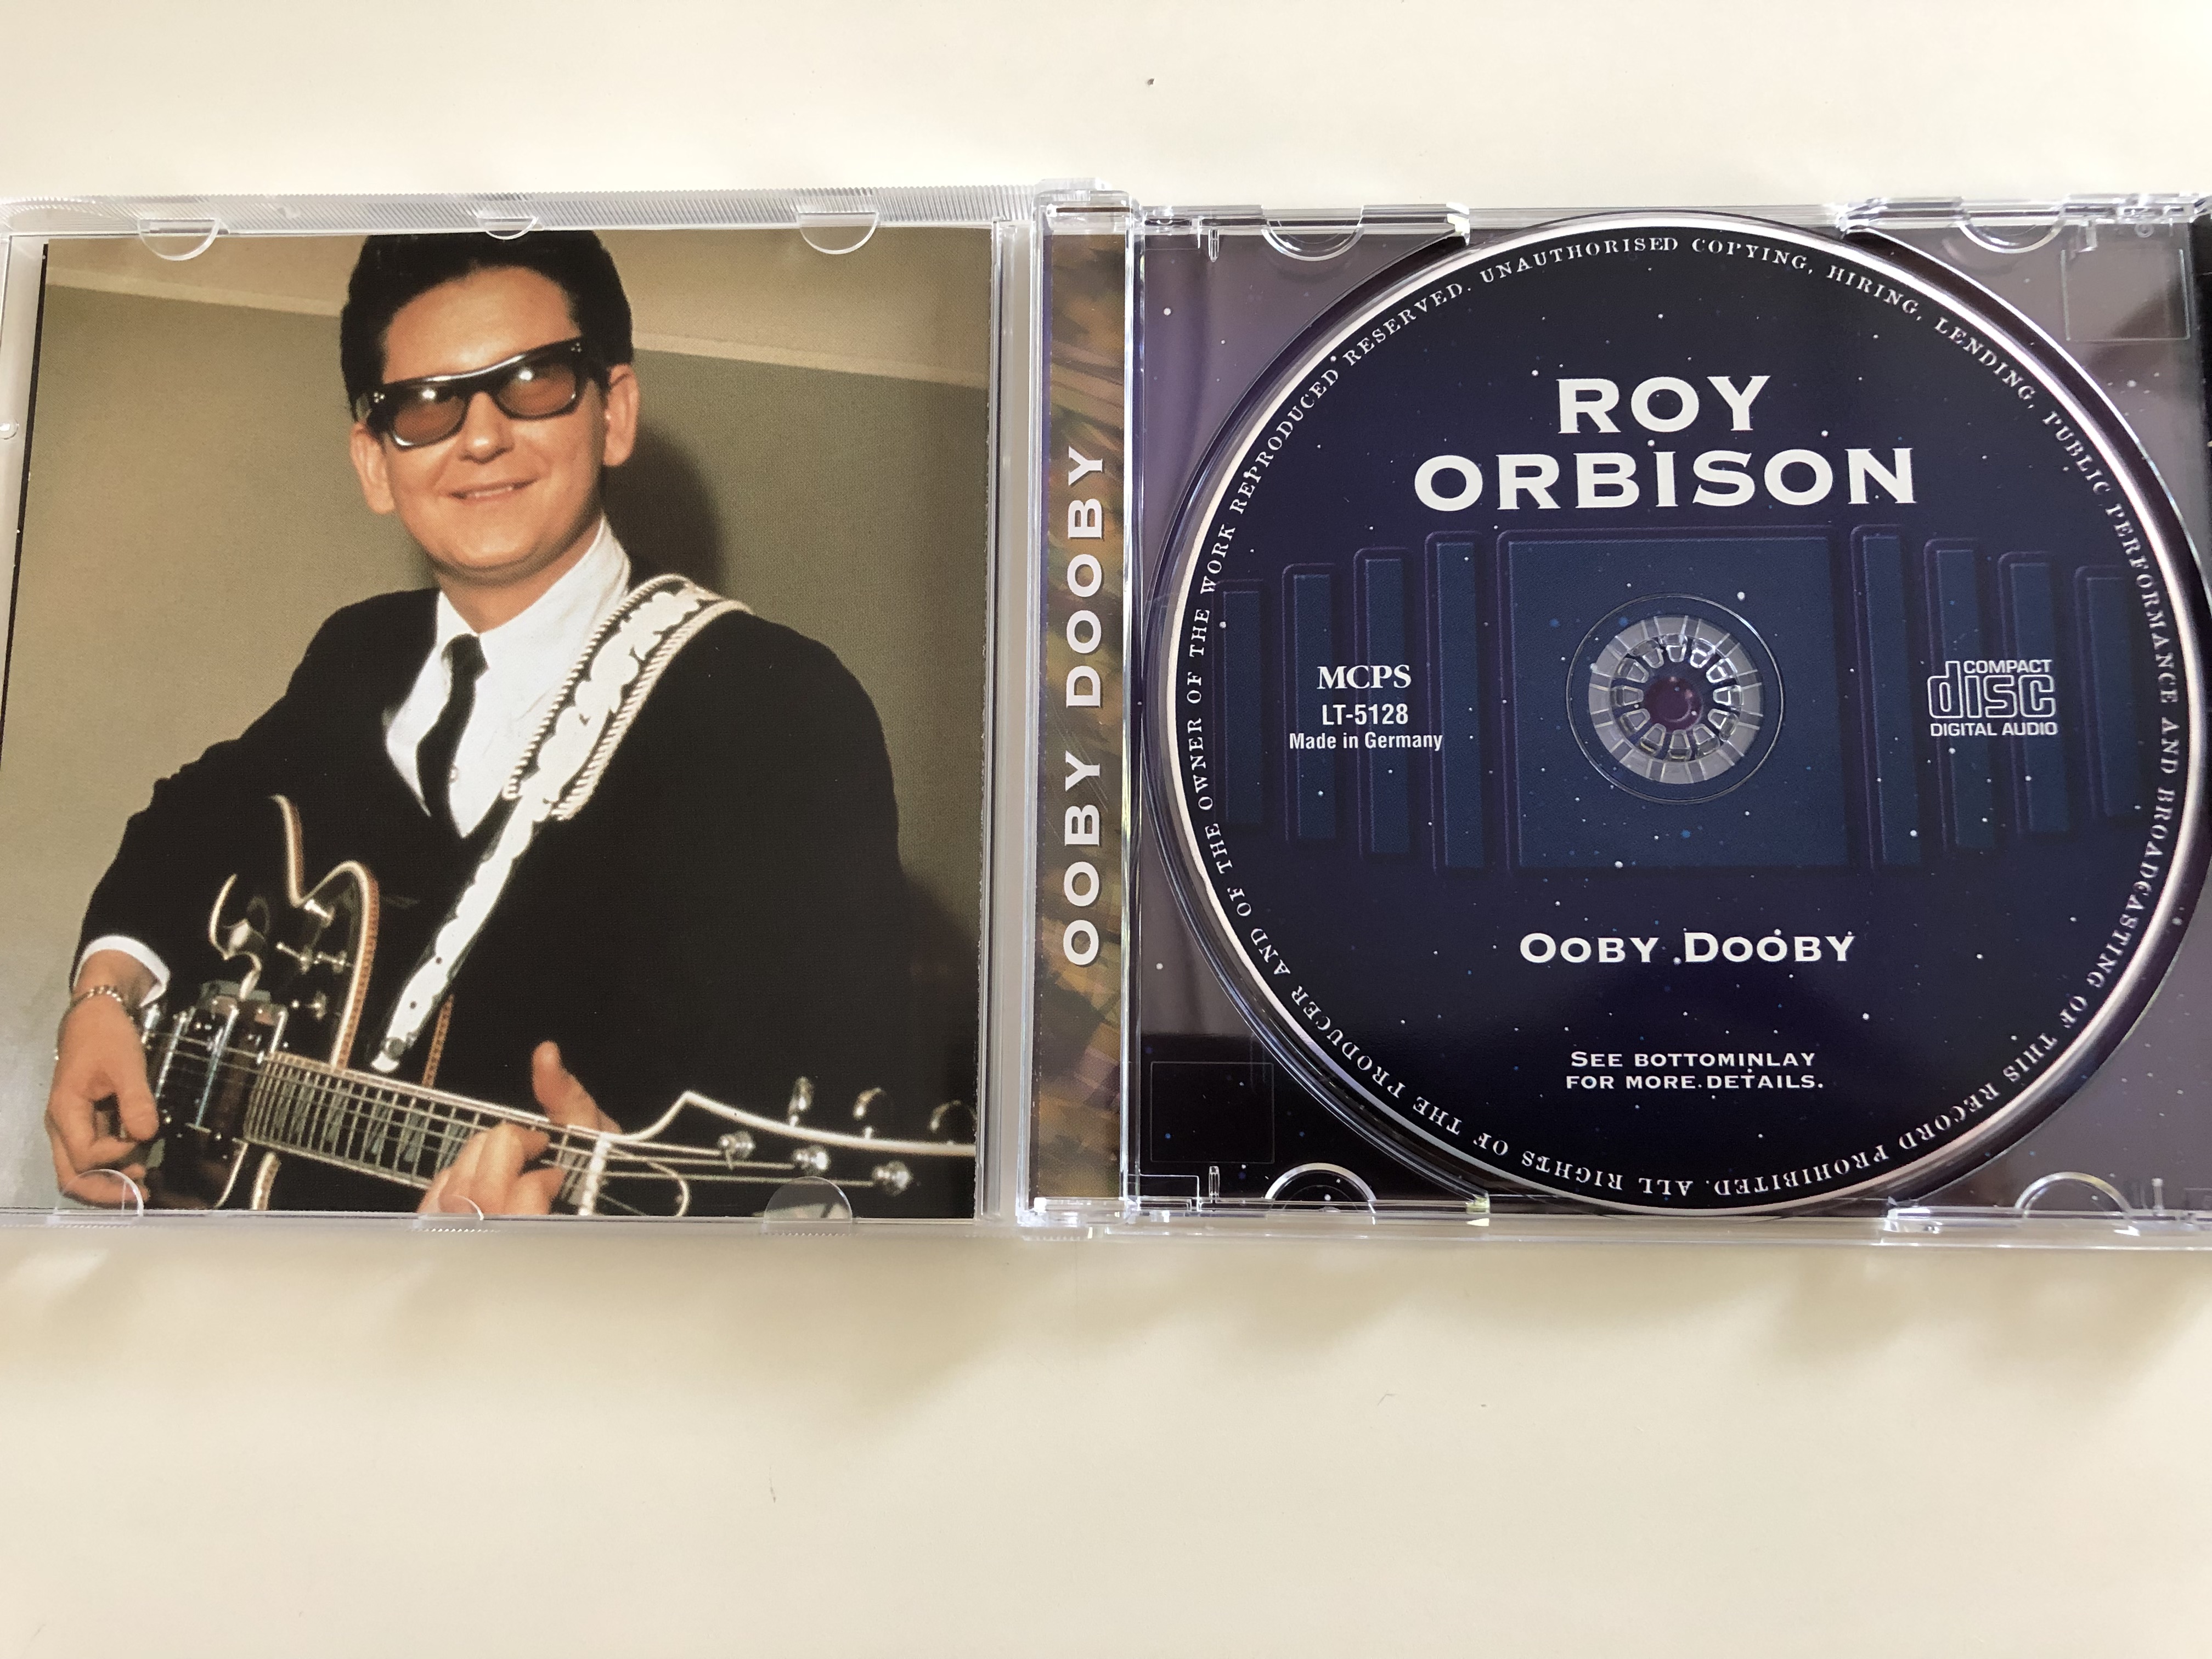 roy-orbison-ooby-dooby-mean-little-mama-rockhouse-fools-hall-of-fame-lt-5128-audio-cd-1999-2-.jpg